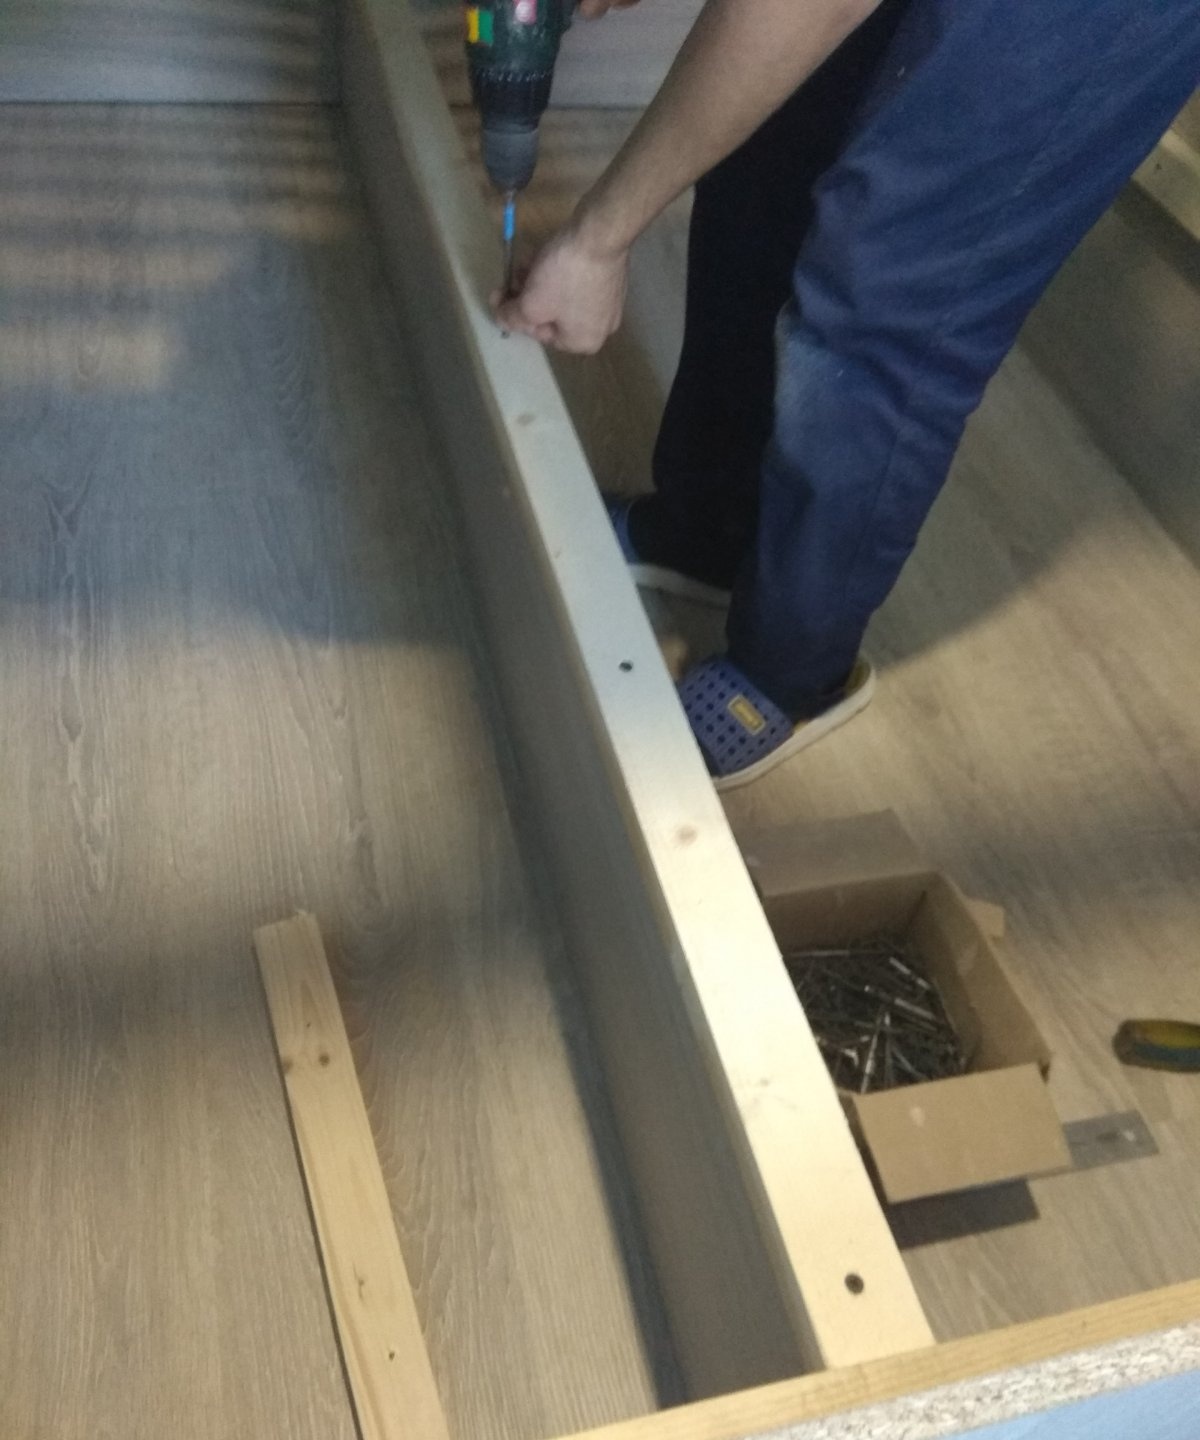 Making a double bed with your own hands